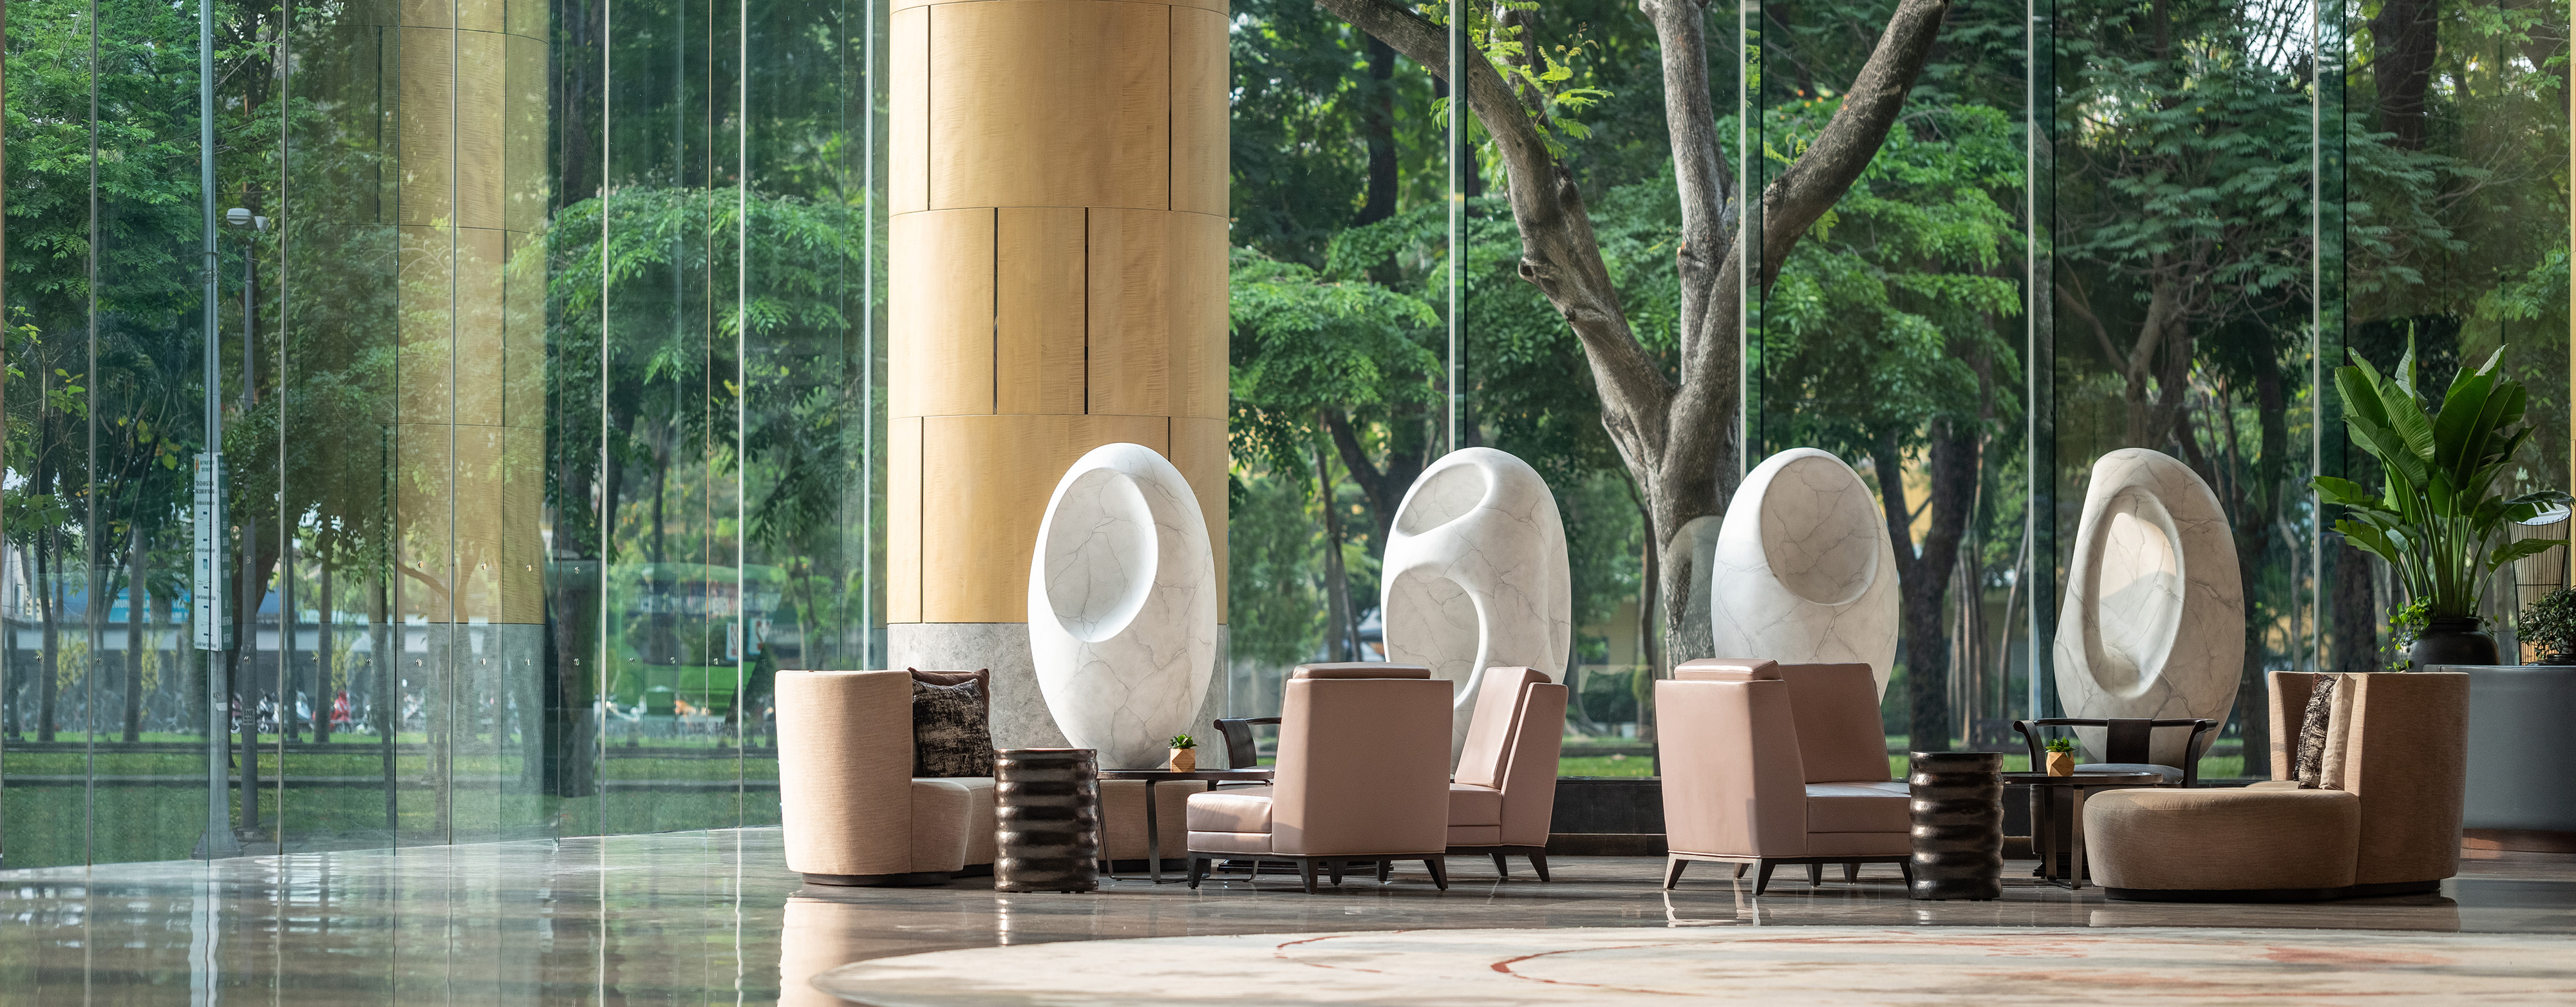 interior of the lounge area in the New World Saigon Hotel showing chairs and oval architecture in front of a large glass wall showing views of trees in the surrounding park